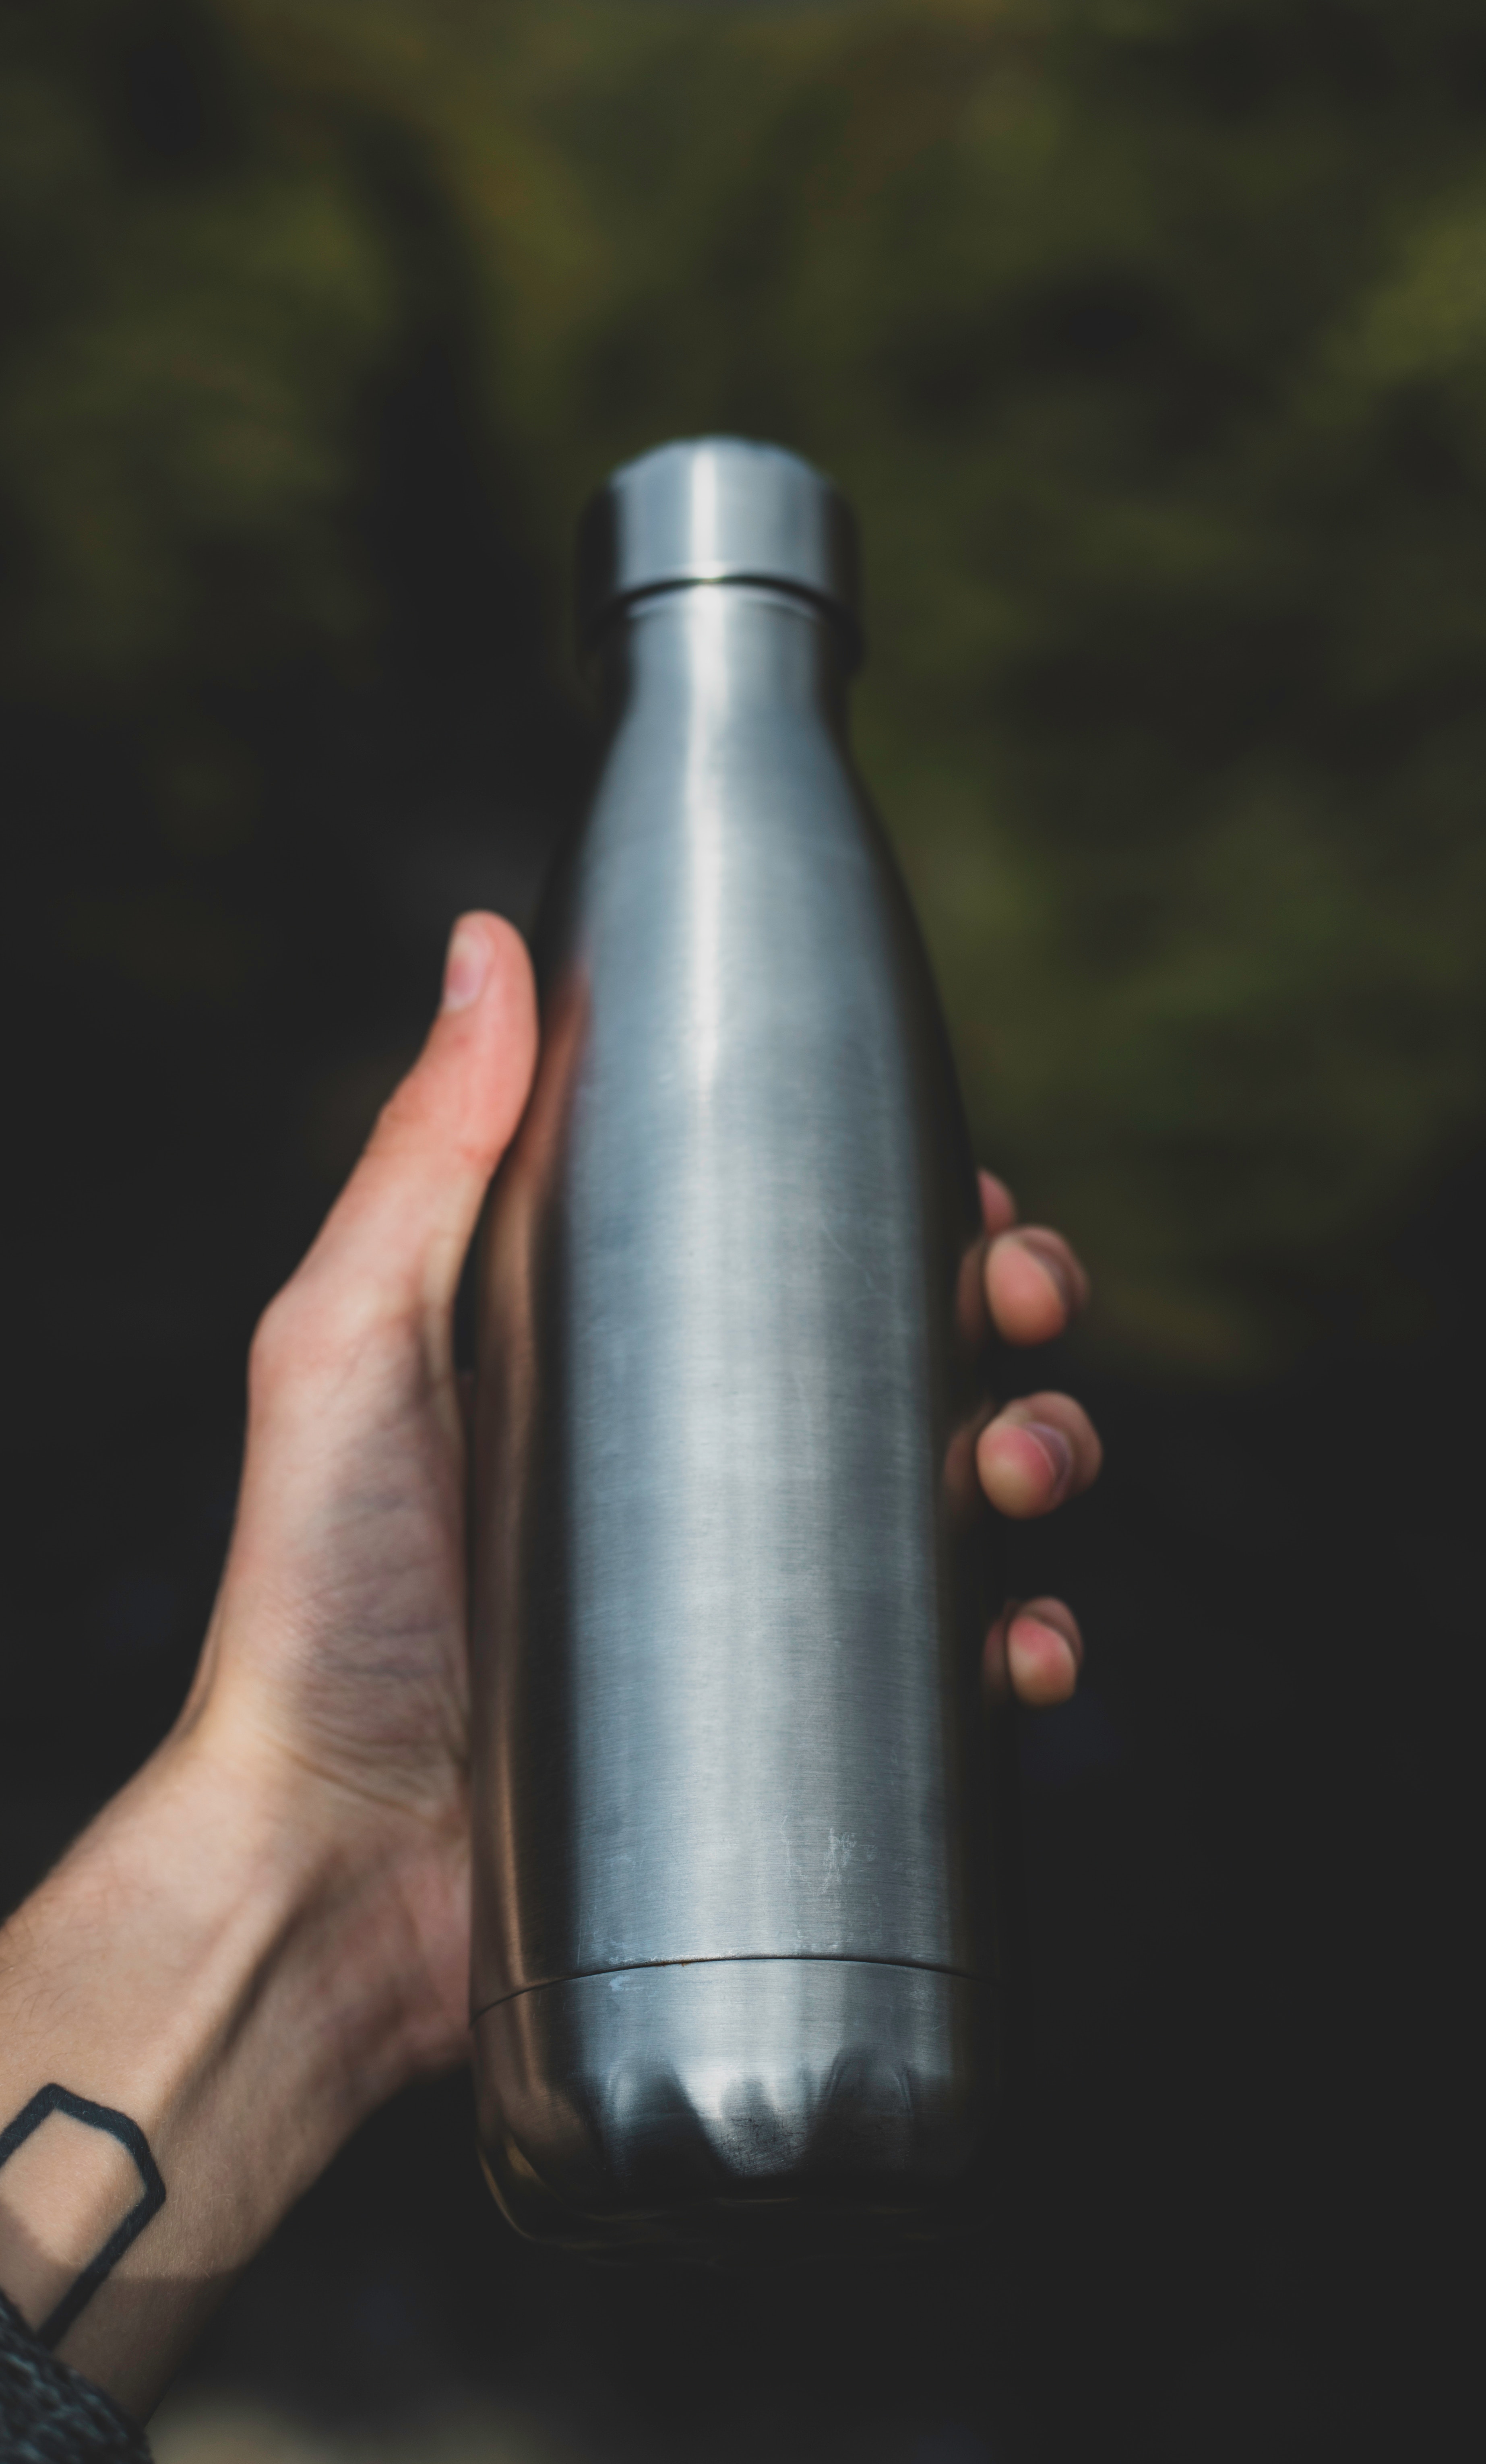 An in-depth review of the best smart water bottles available in 2019.